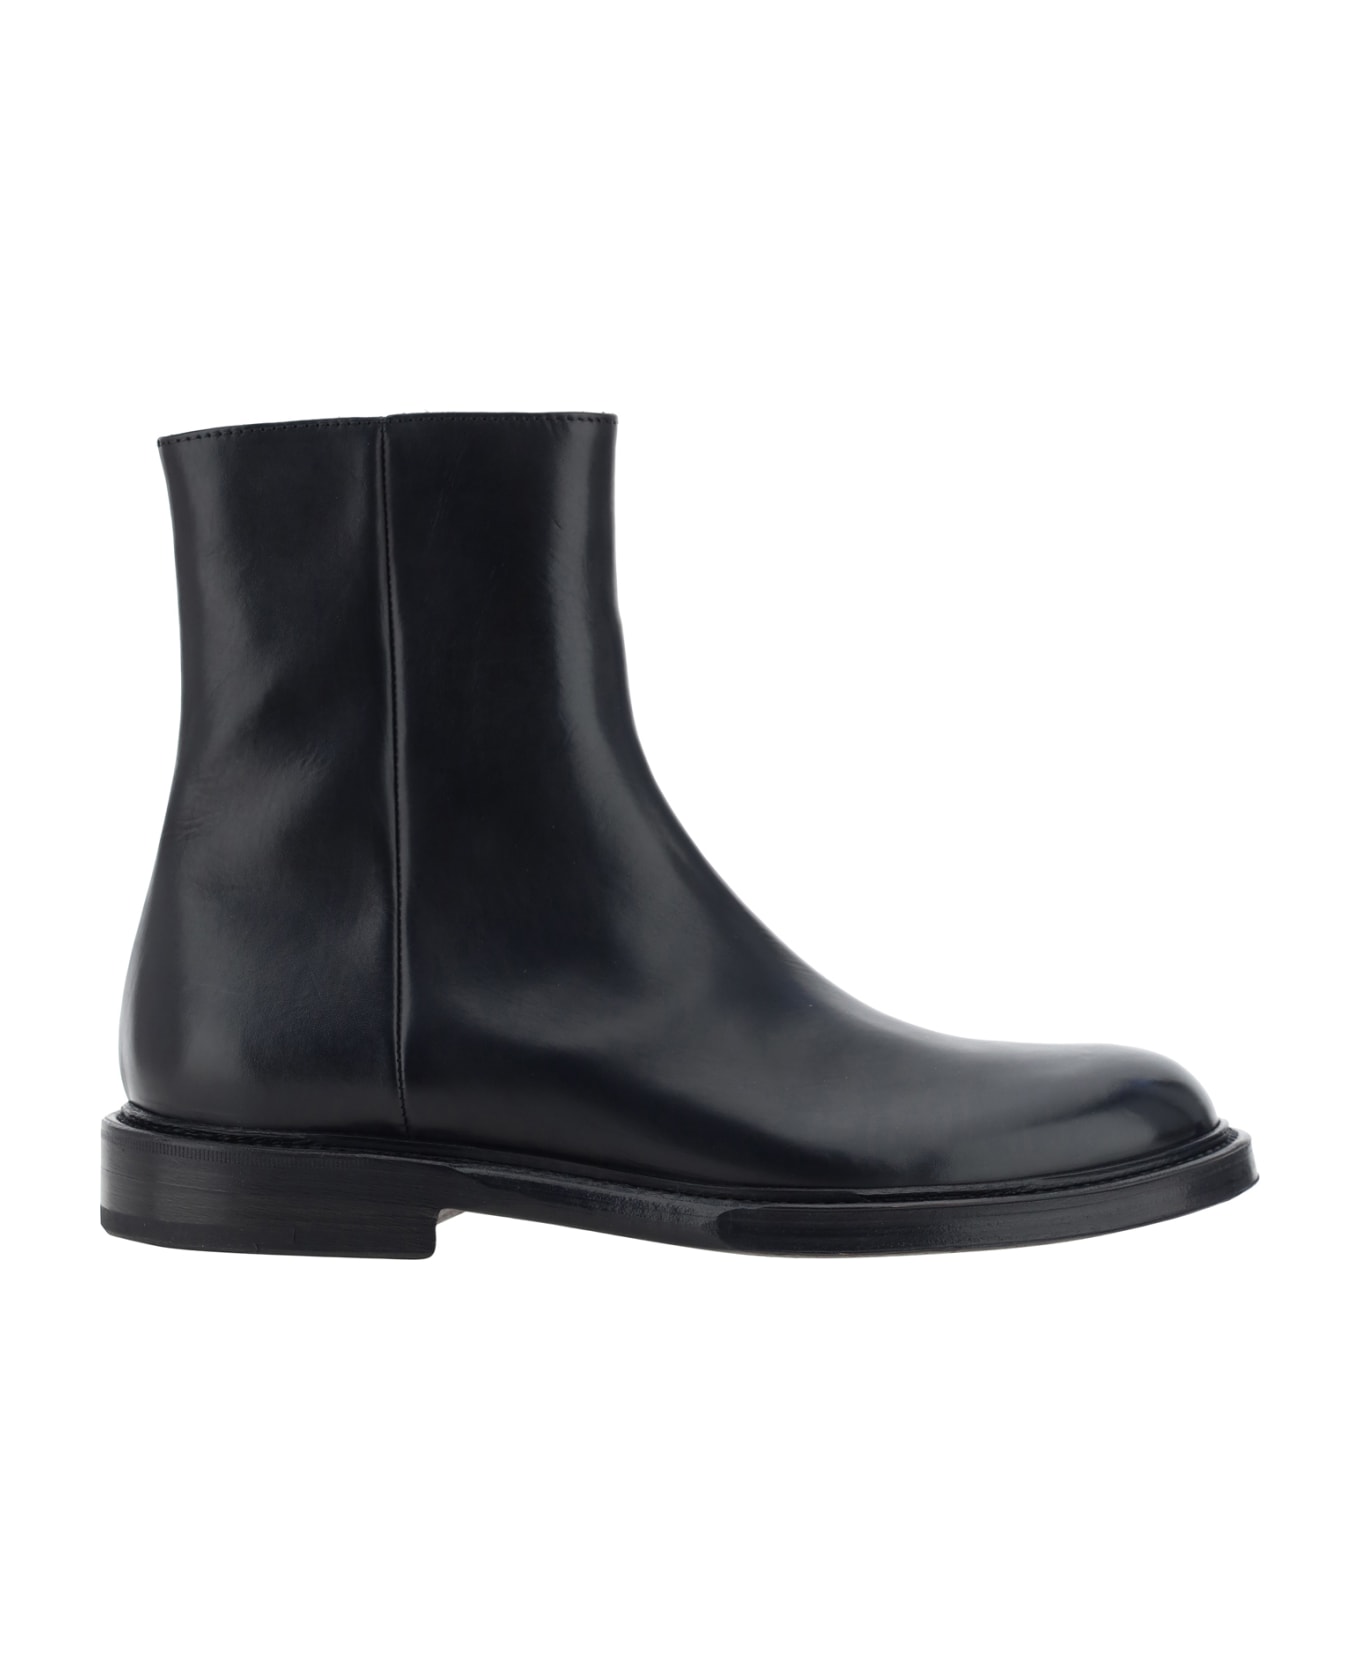 Dami Ankle Boots - Nero ブーツ